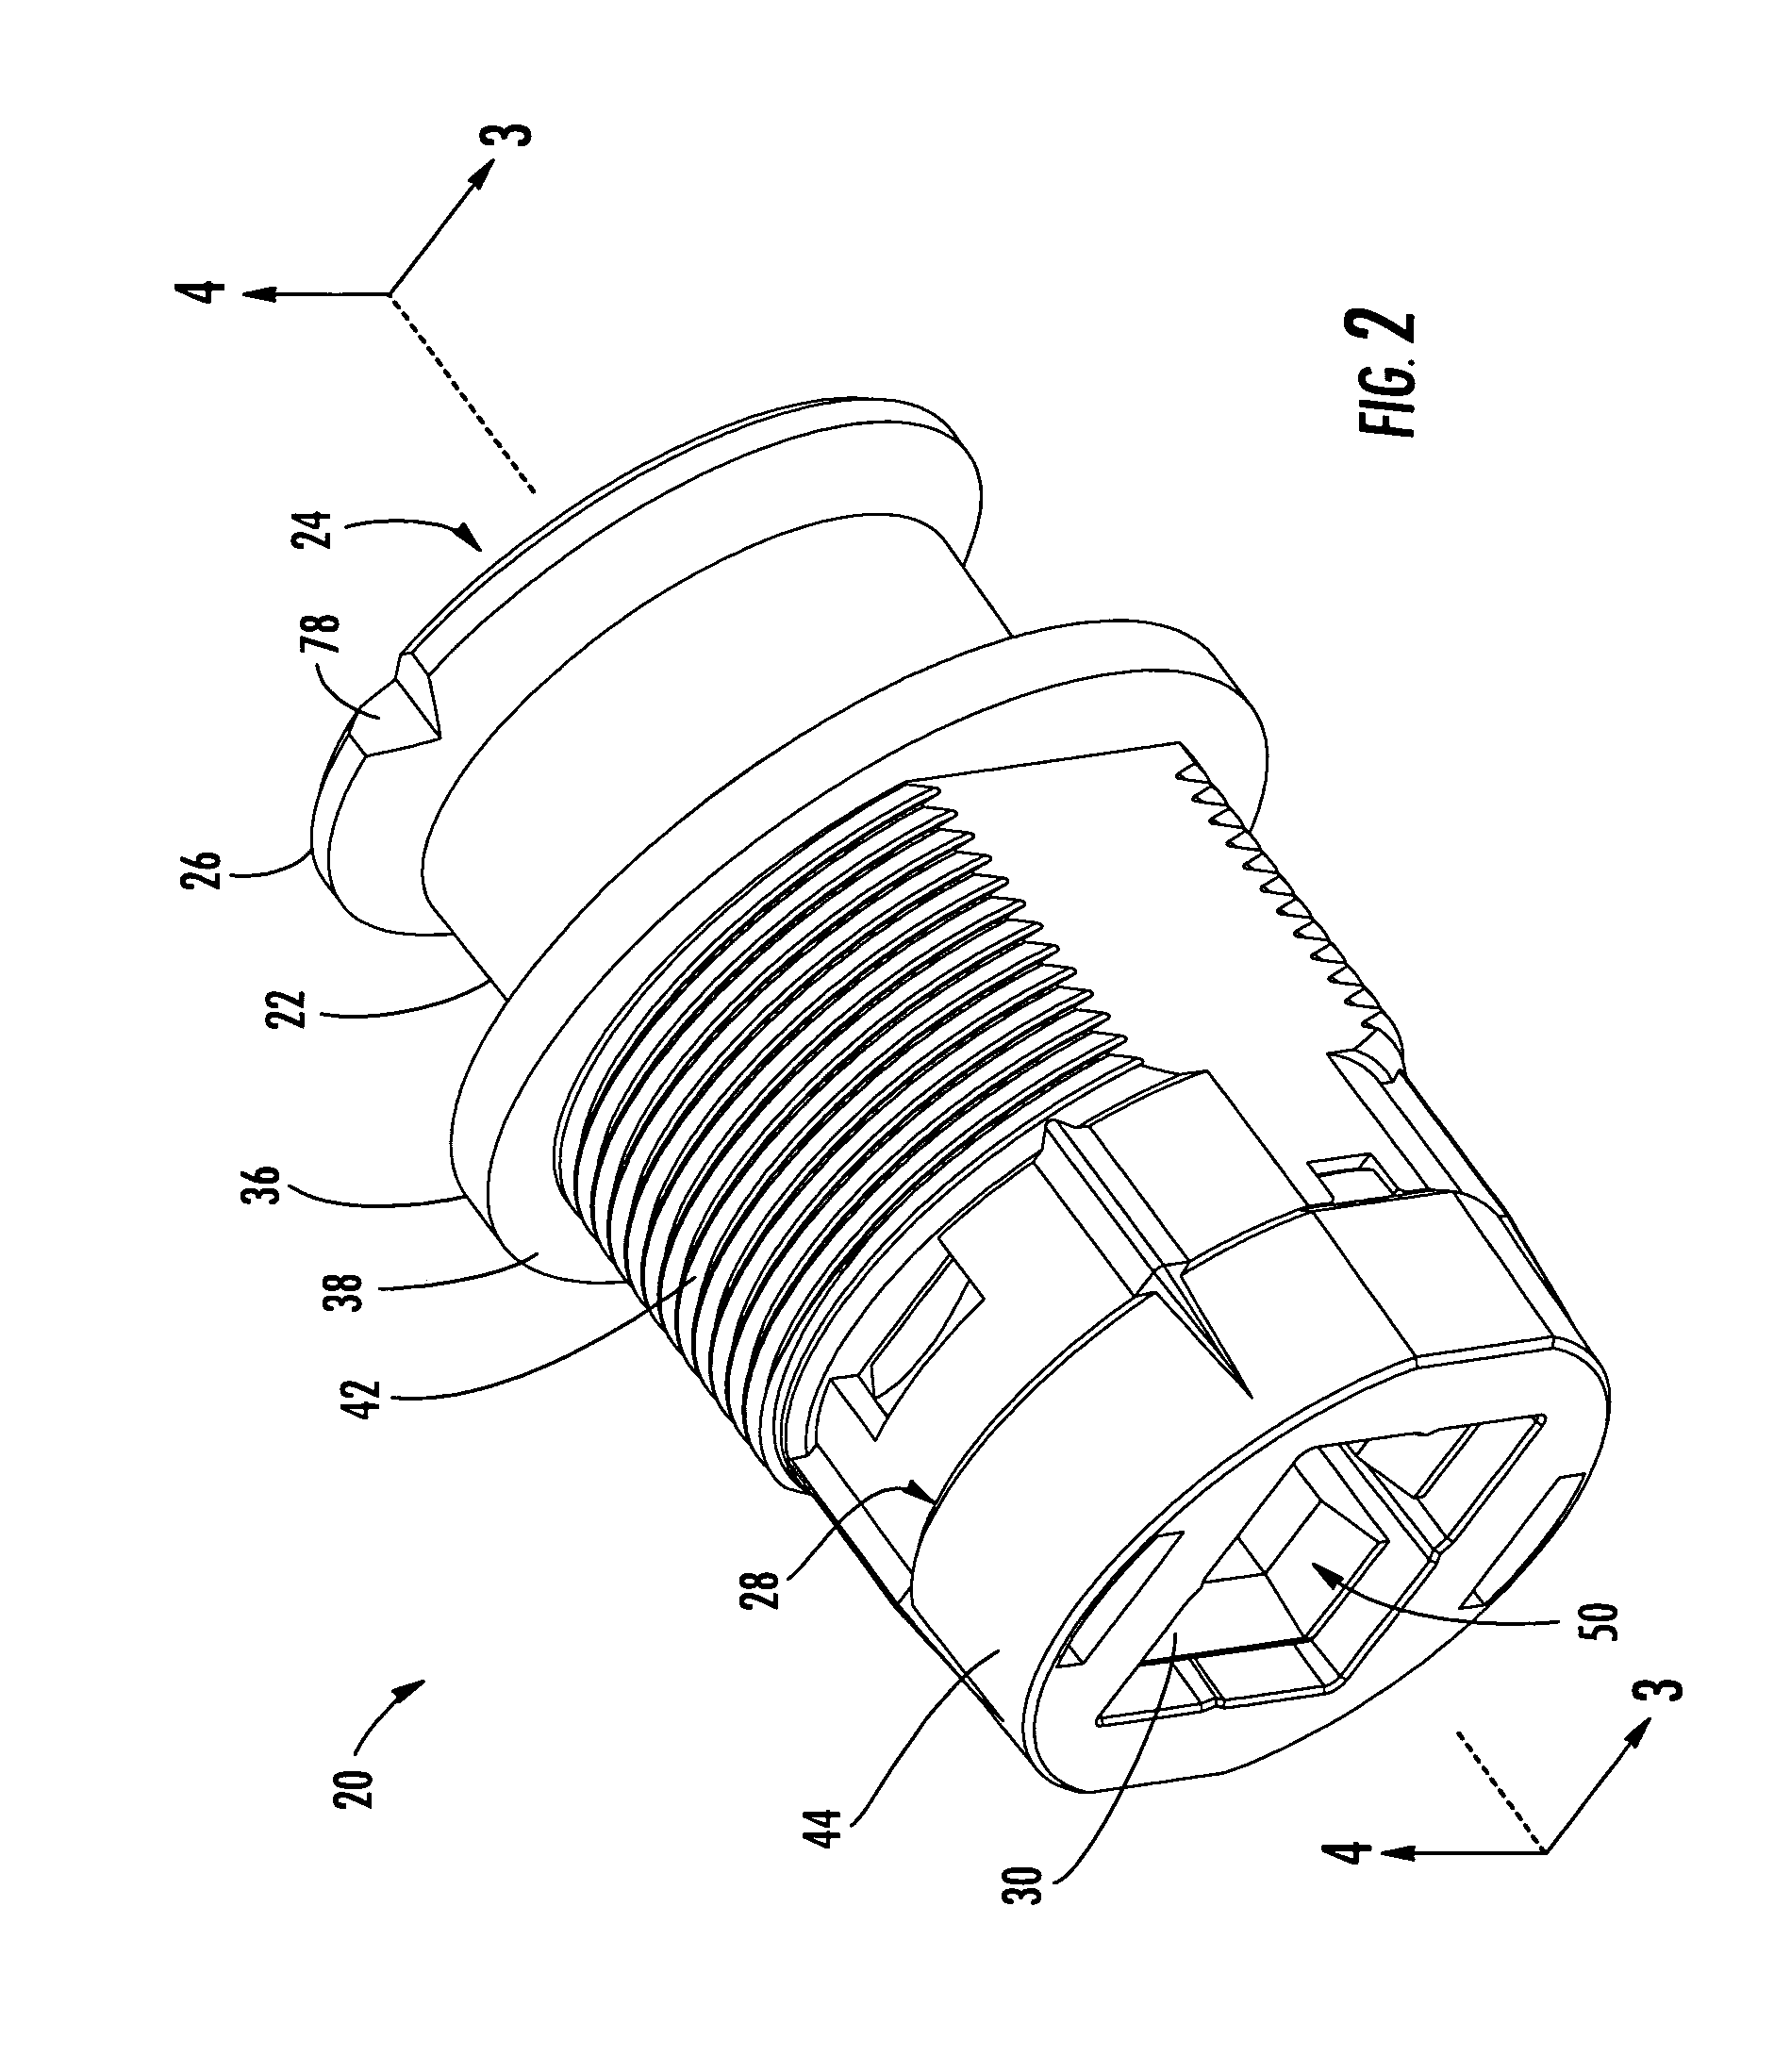 One-piece fiber optic receptacle having chamfer and alignment ribs